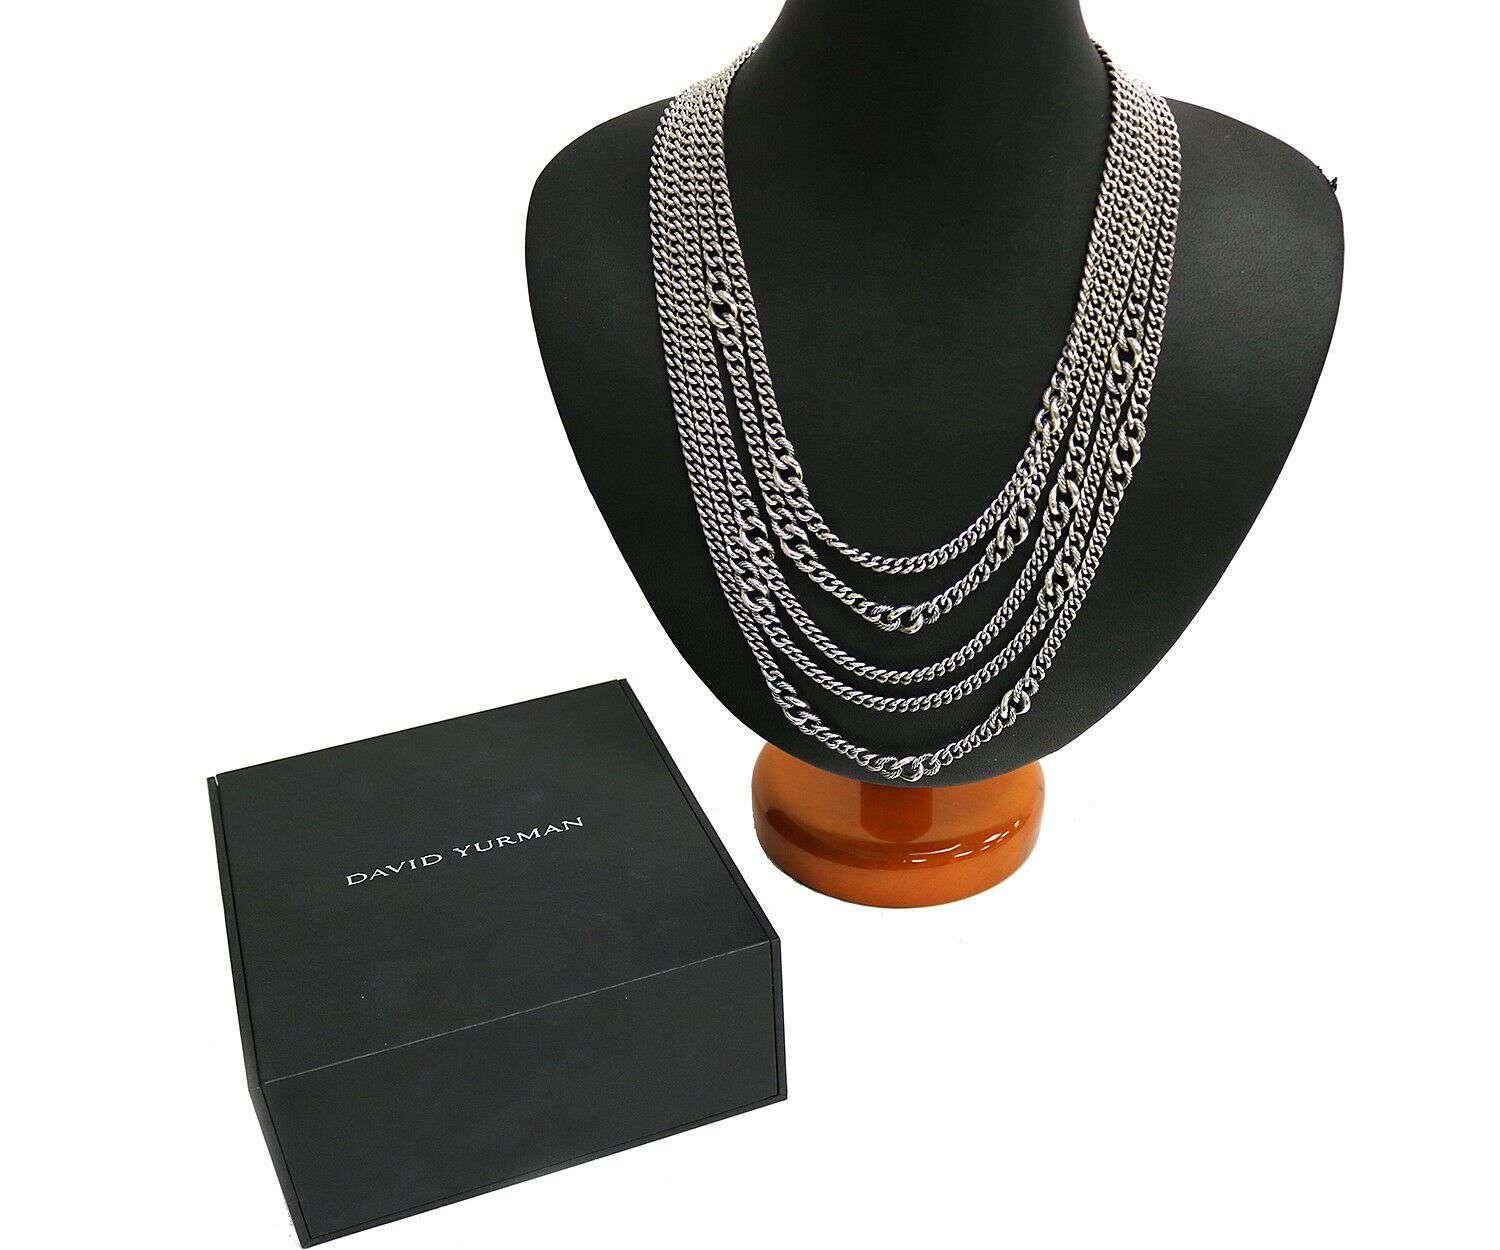 David Yurman 5 Row Drape Curb Chain Necklace W/Box OG Tag

David Yurman 5 Row Drape Curb Chain Necklace
.925 Sterling Silver
Necklace Length: 19.75-21.25 Inches (Adjustable)
Necklace Weight: 182.40 Grams
David Yurman Box And Original Tag
Stamped: